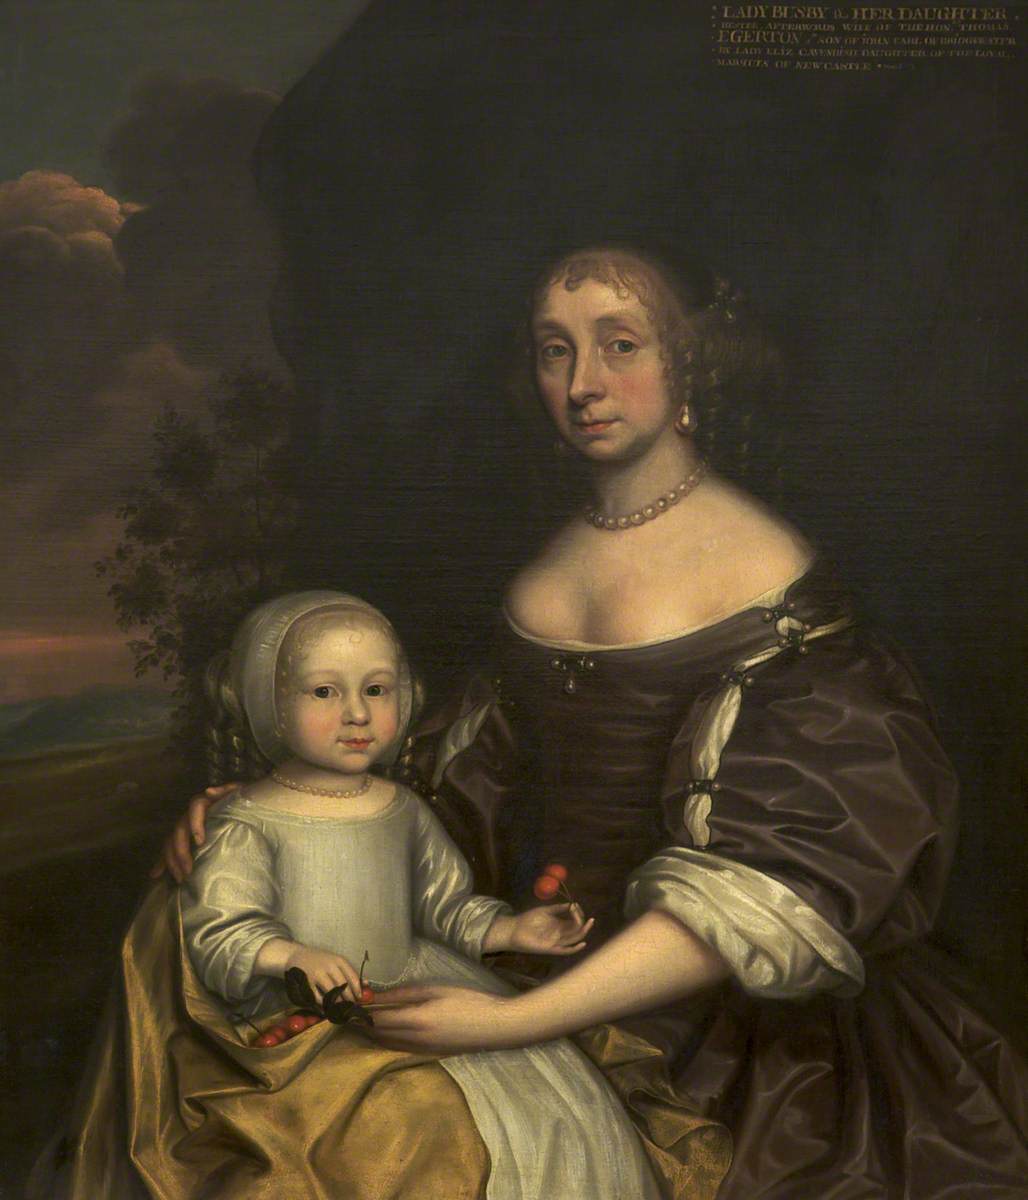 N. Mainwaring, Lady Busby, and Her Daughter, Hester Busby (d.1724), Later the Honourable Mrs Thomas Egerton